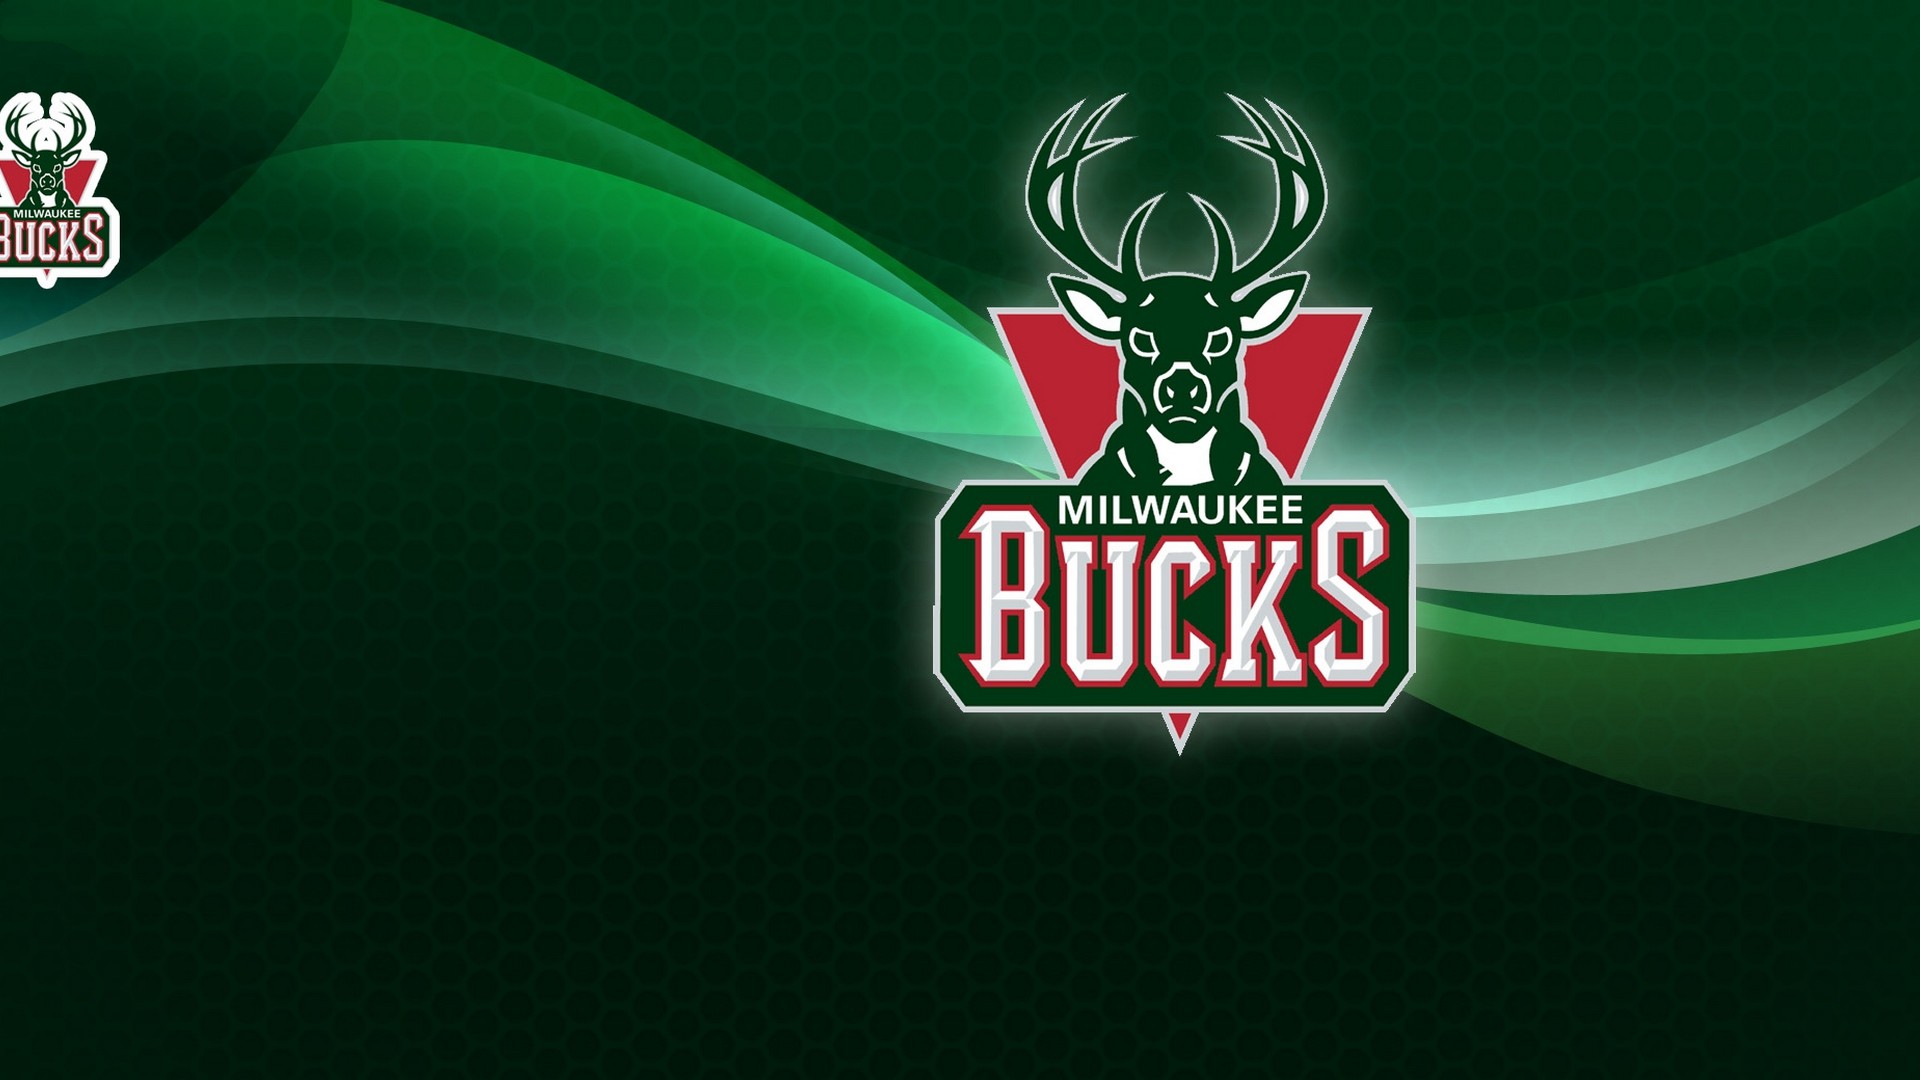 Wallpapers Milwaukee Bucks with high-resolution 1920x1080 pixel. You can use this wallpaper for your Desktop Computer Backgrounds, Windows or Mac Screensavers, iPhone Lock screen, Tablet or Android and another Mobile Phone device